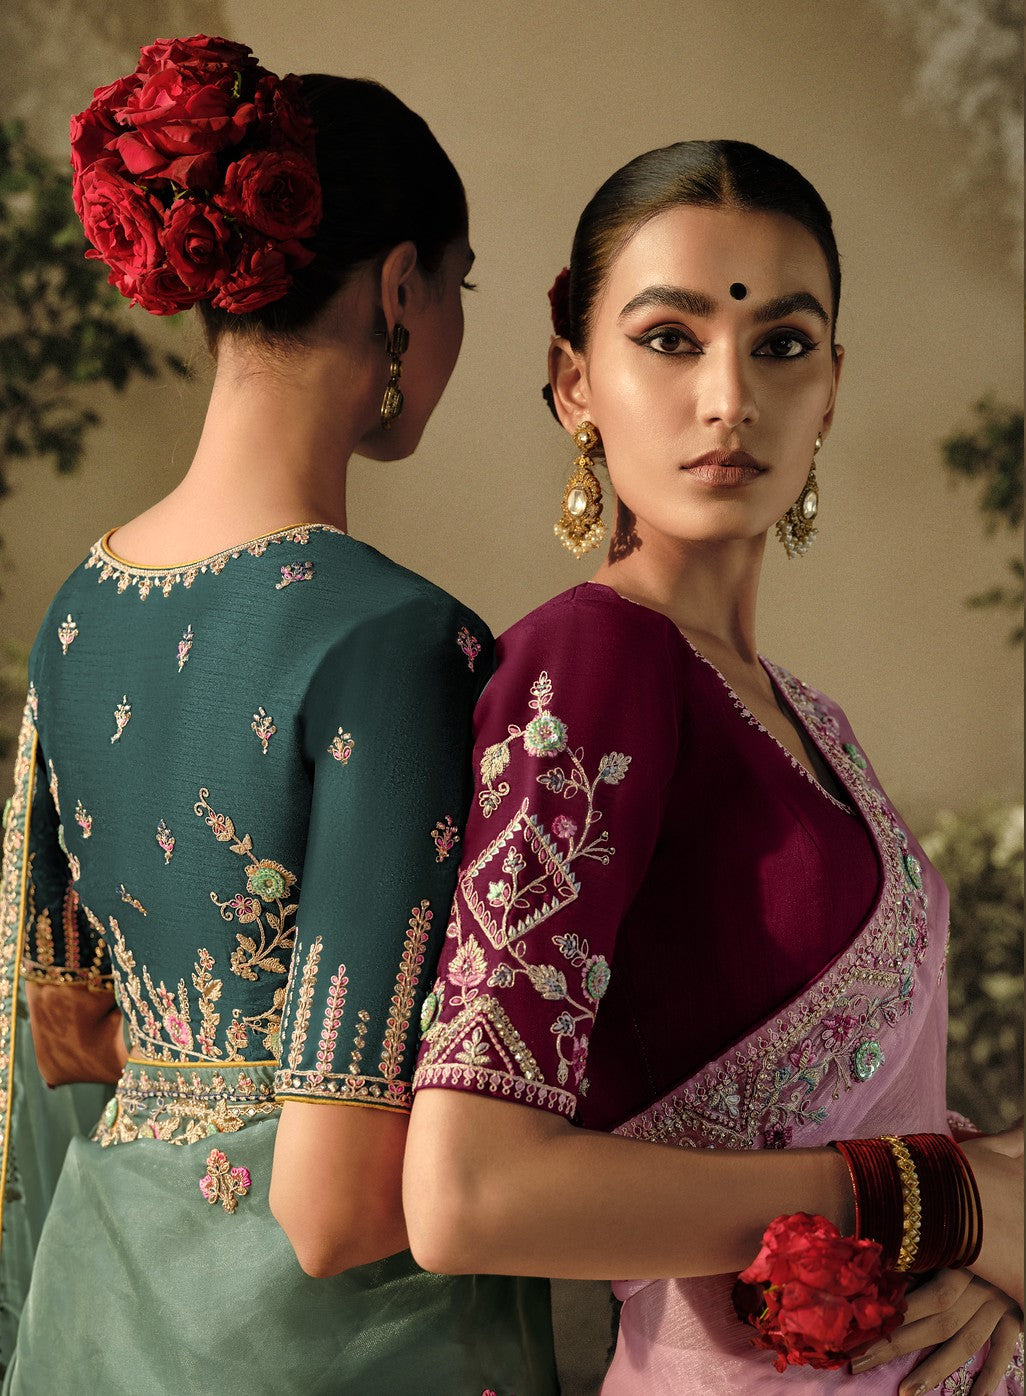 Find out our Best sellers collection loved by thousands of sari lovers. Kotasilk.com